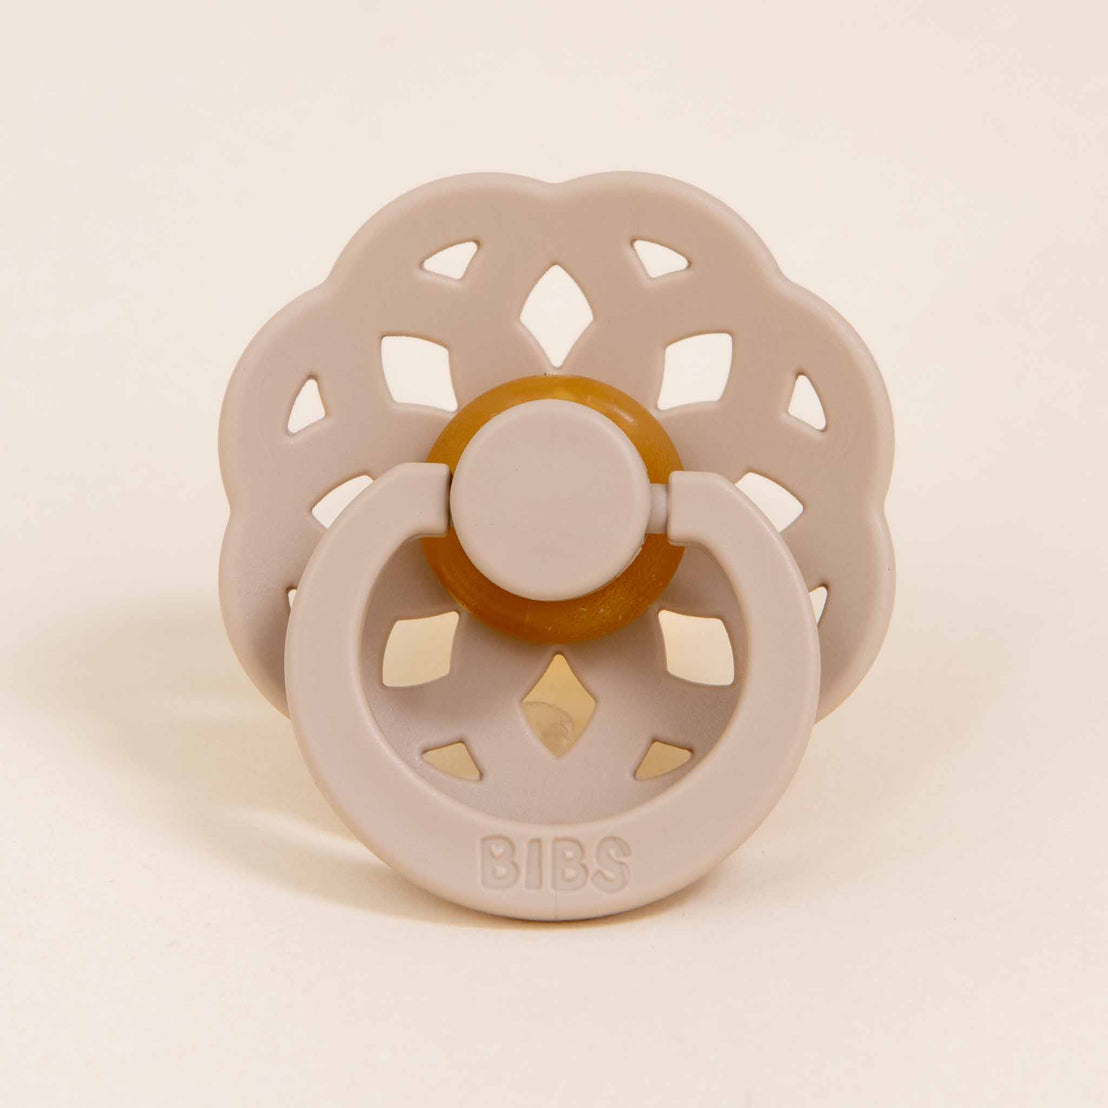 An Kristina beige pacifier with a circular, flower-shaped shield and a brown handle, displayed against a plain, light background.